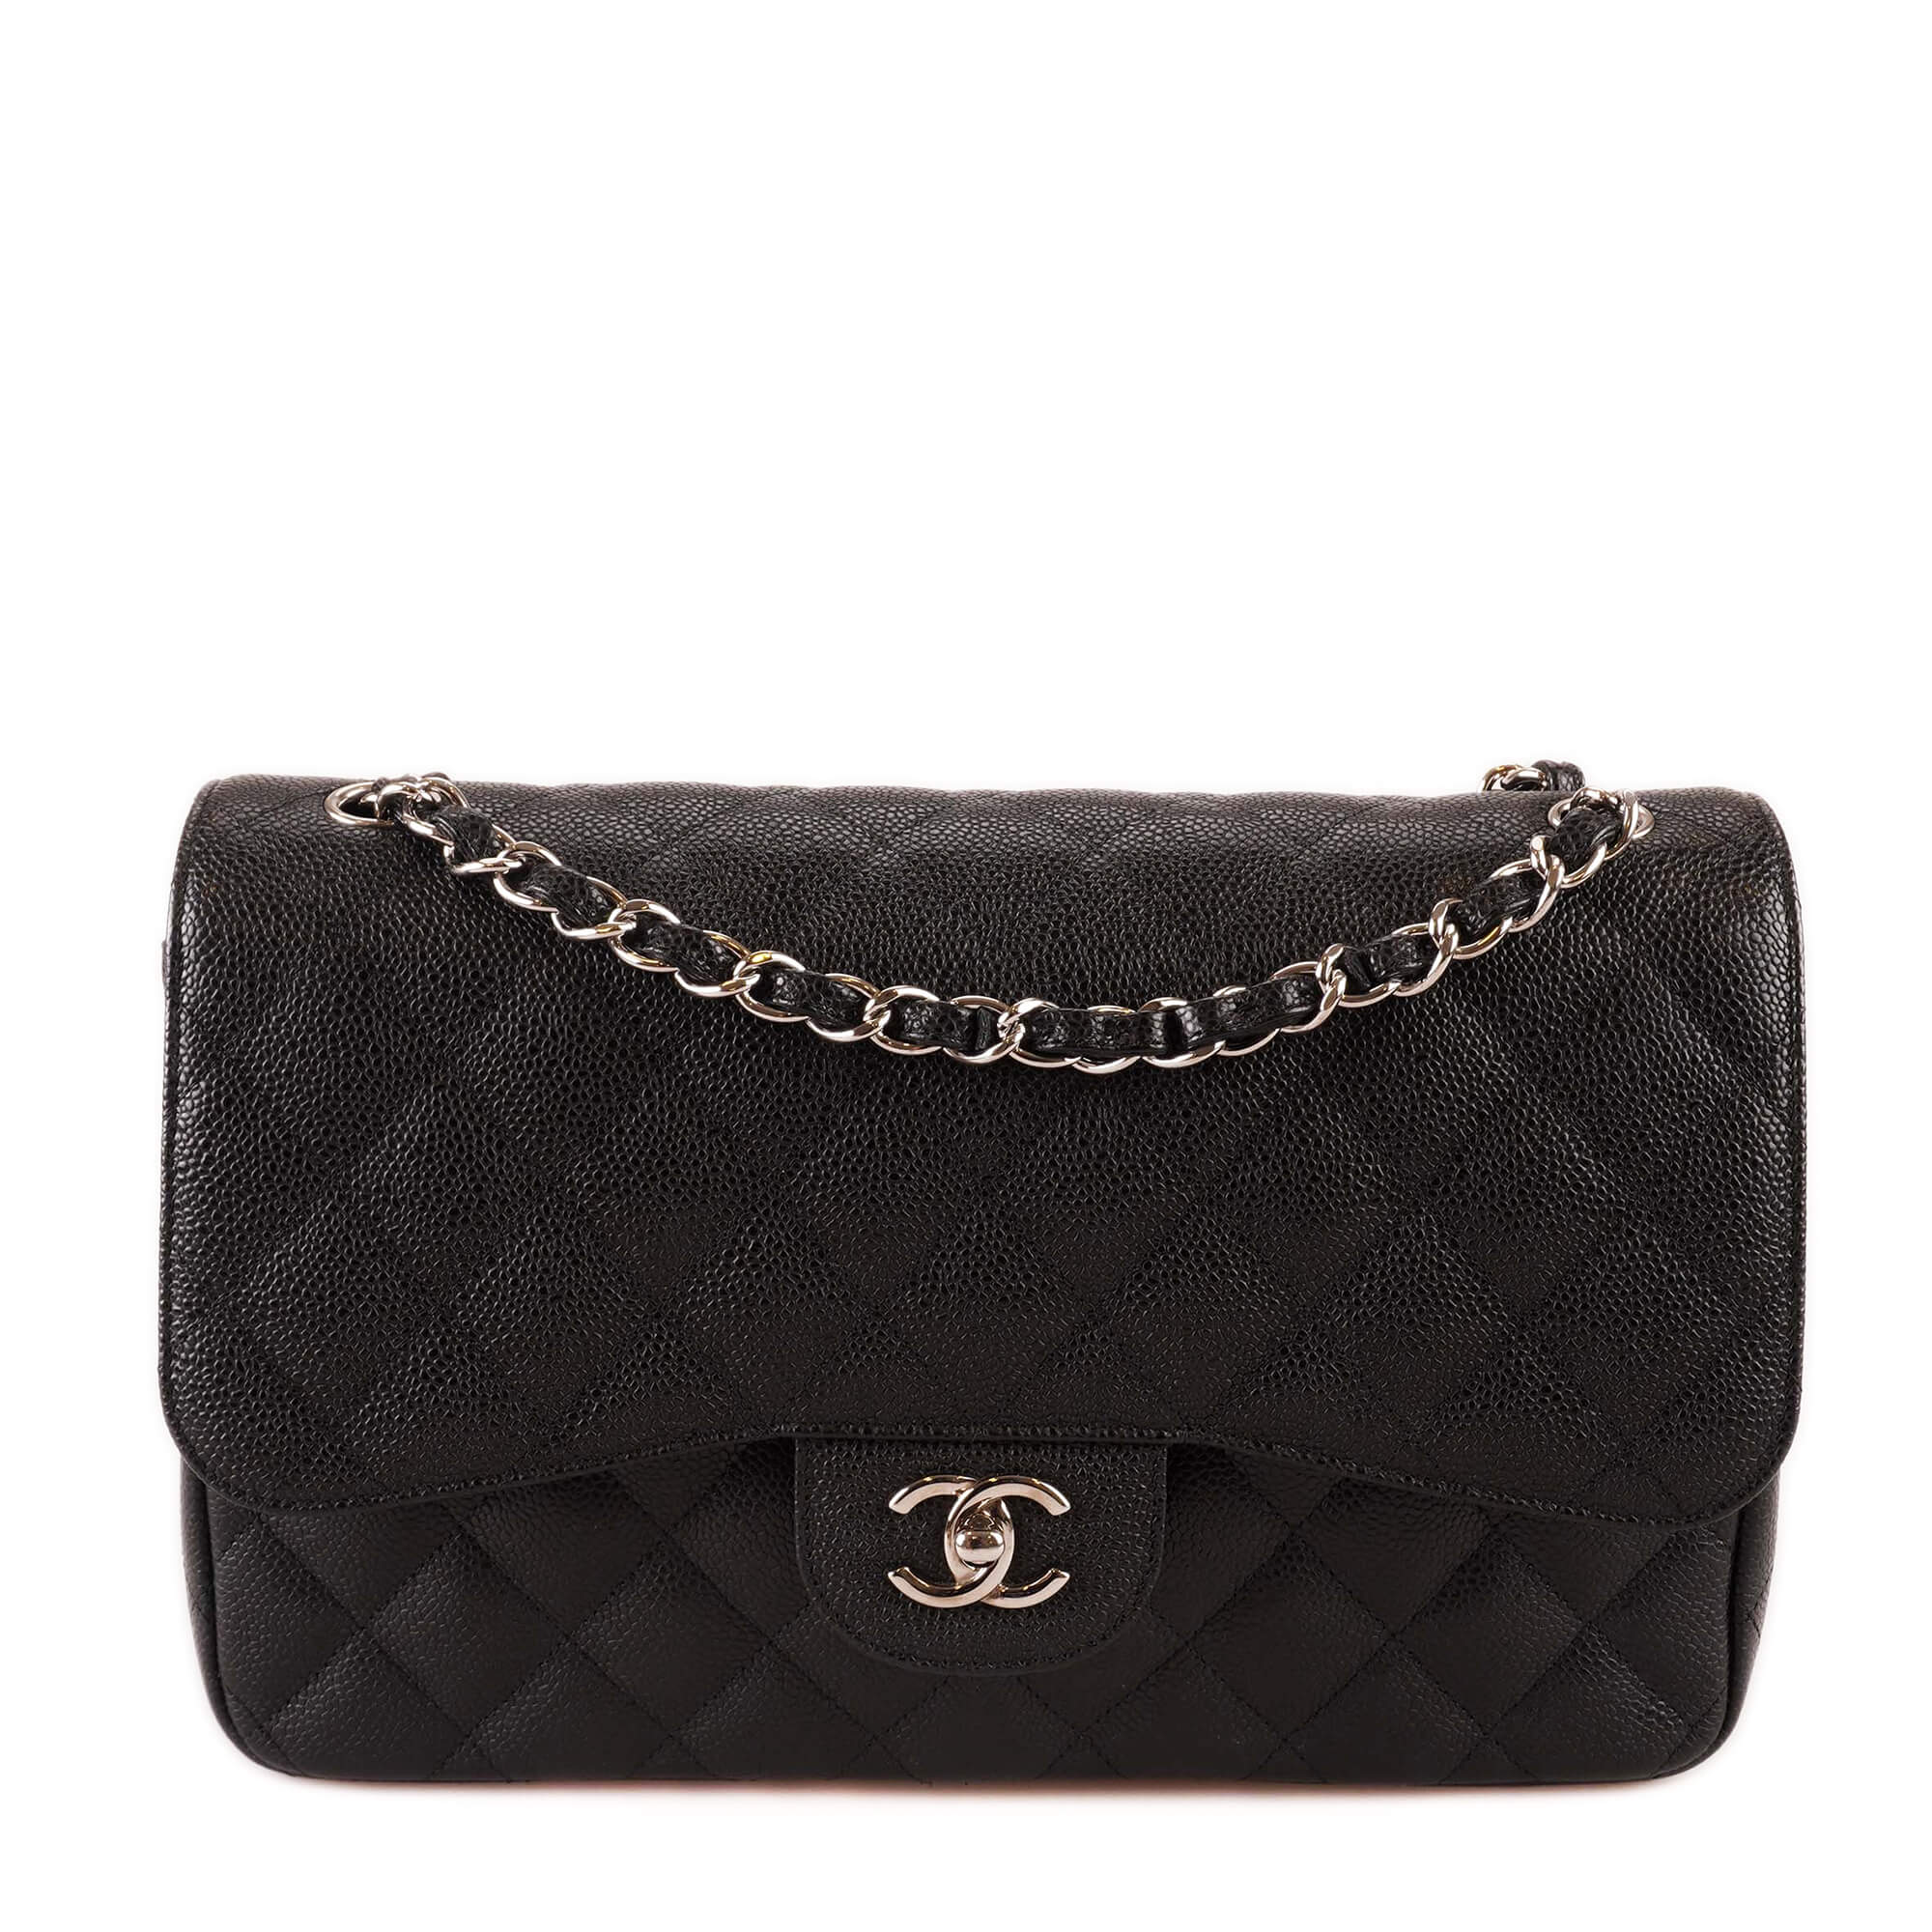  Chanel - Black Quilted Caviar Leather Jumbo Double Flap Bag